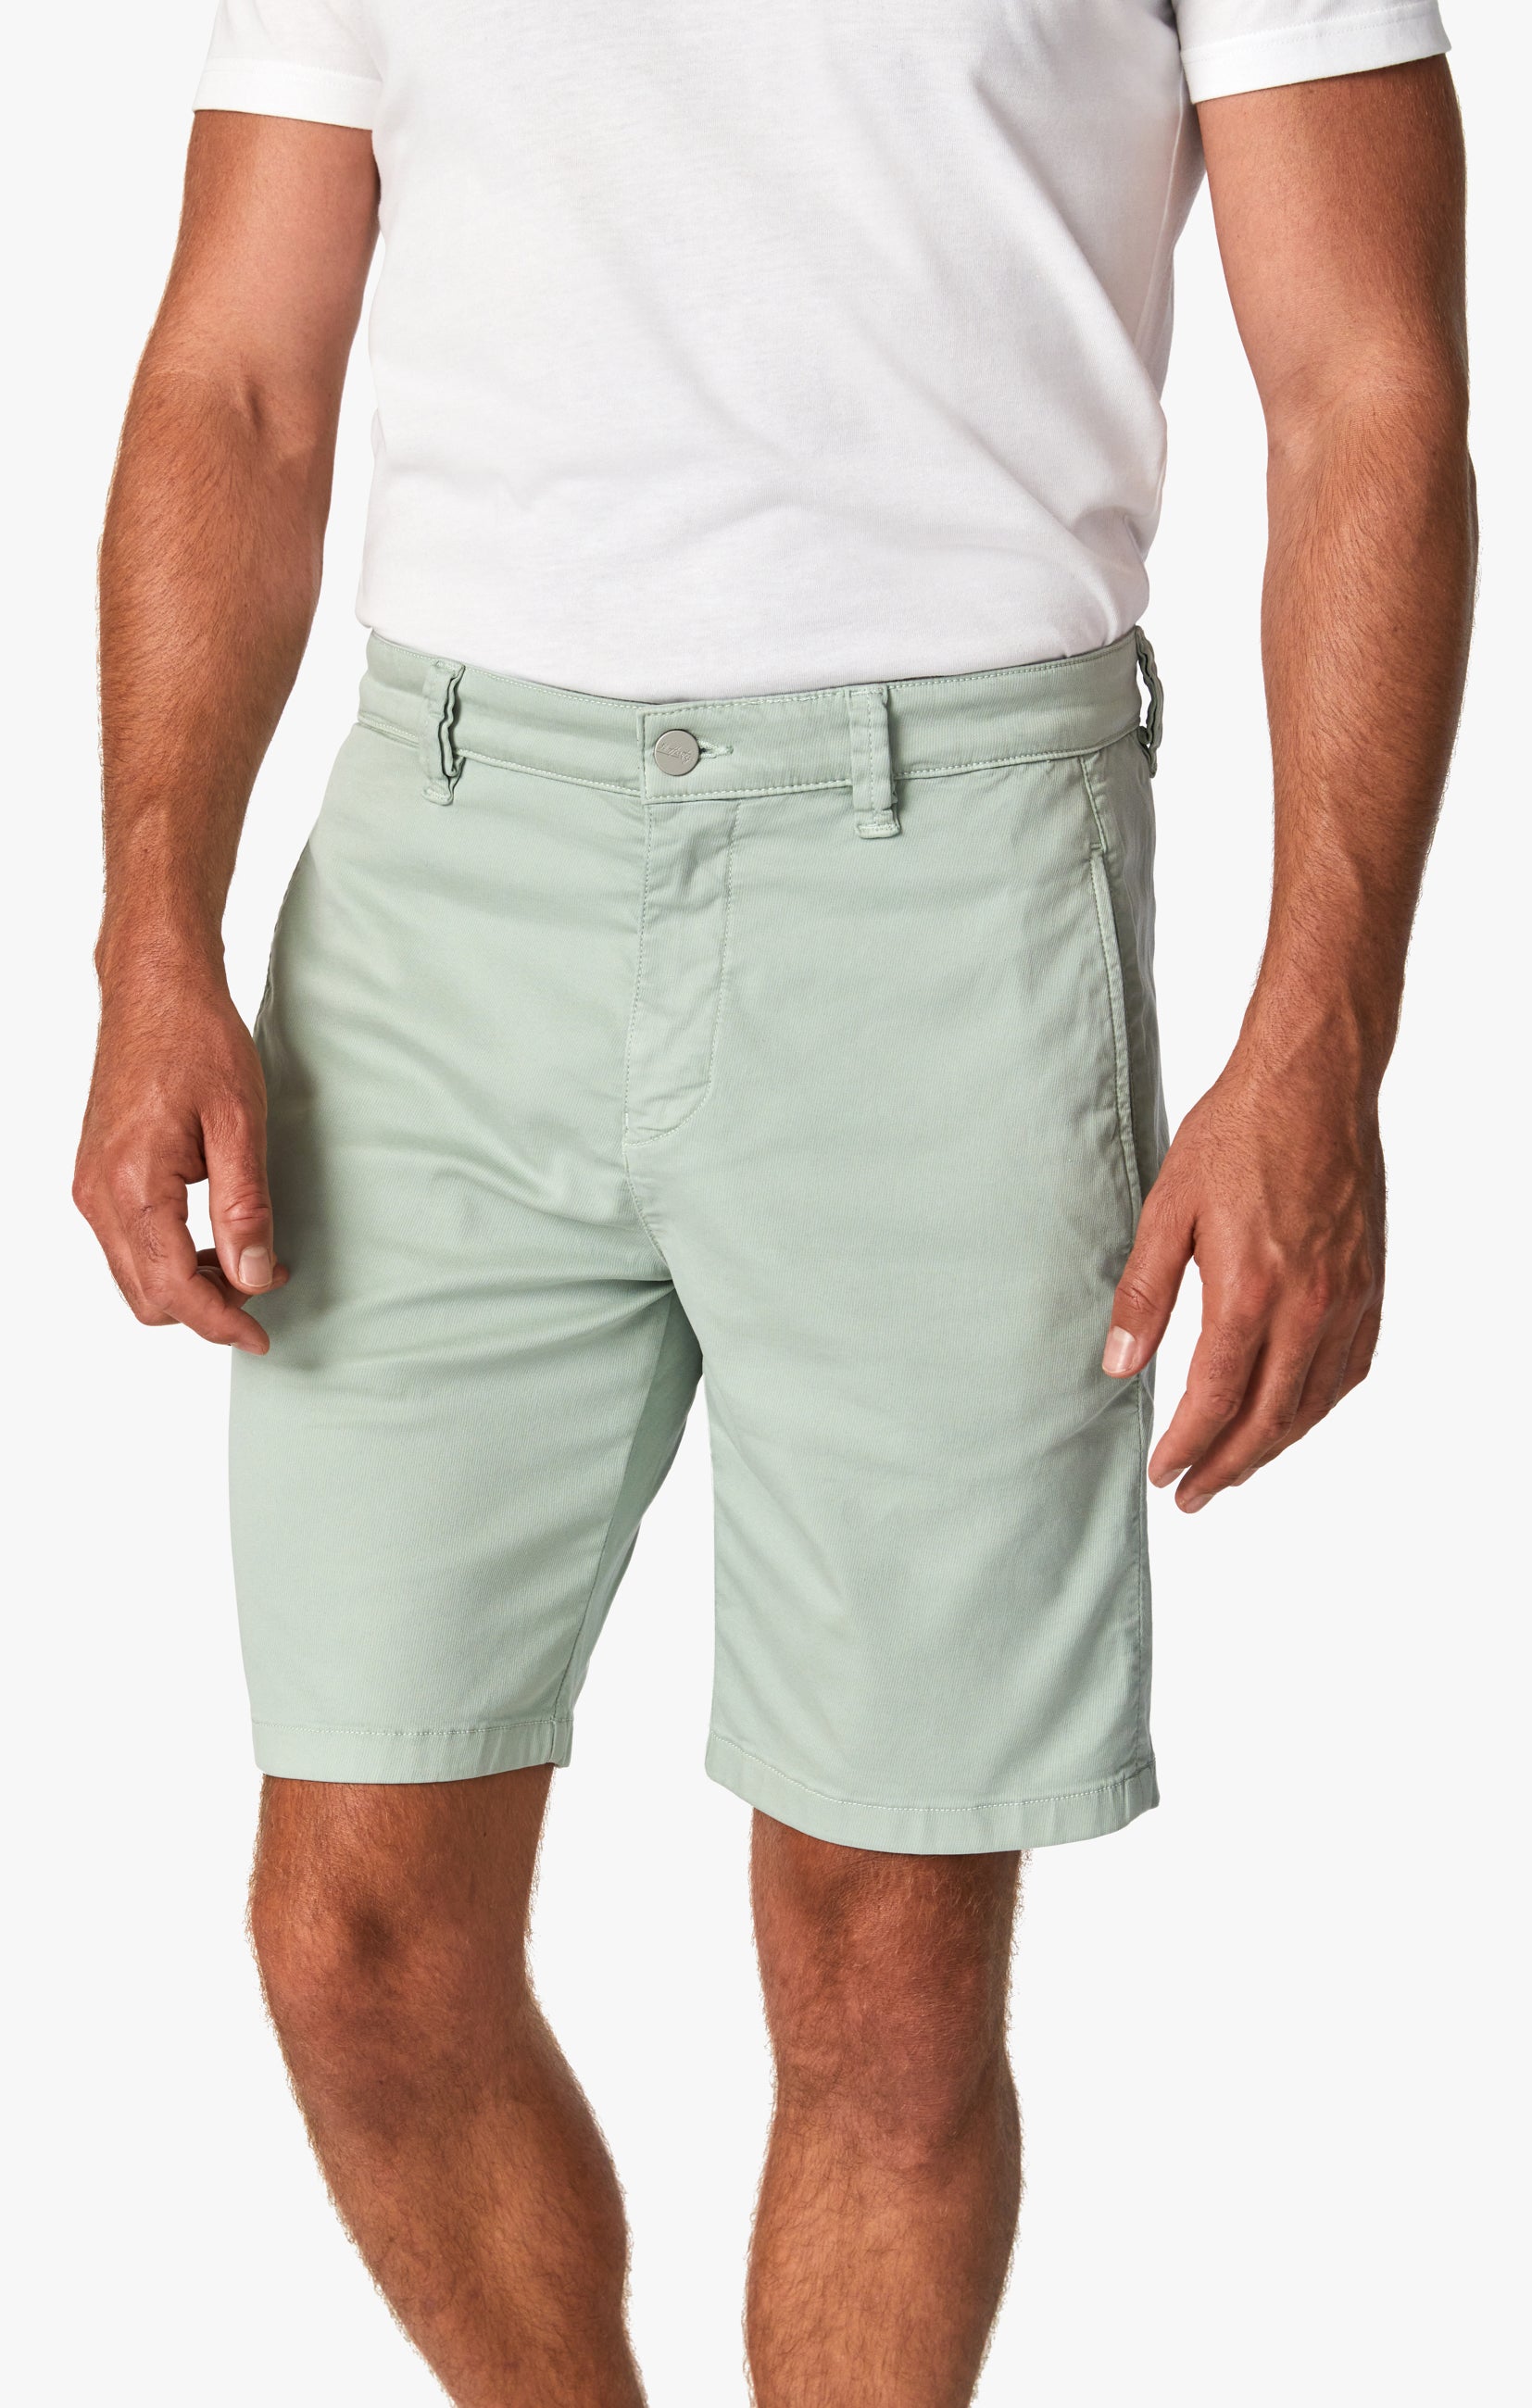 Nevada Shorts In Mint Soft Touch Image 3